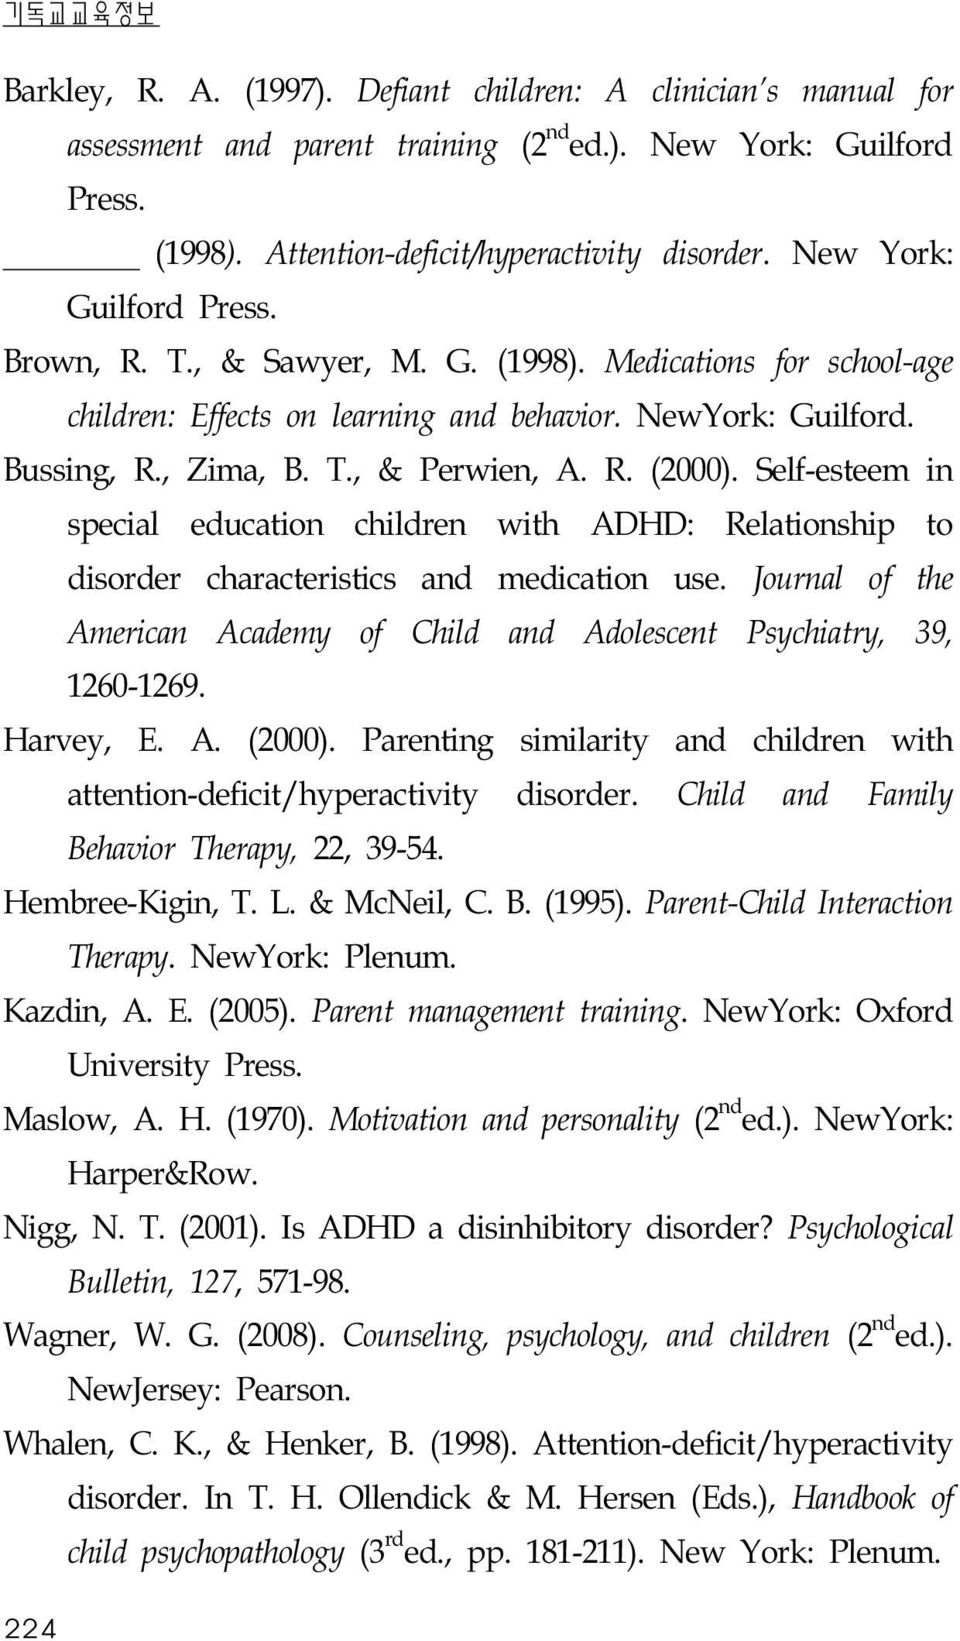 Self-esteem in special education children with ADHD: Relationship to disorder characteristics and medication use. Journal of the American Academy of Child and Adolescent Psychiatry, 39, 1260-1269.